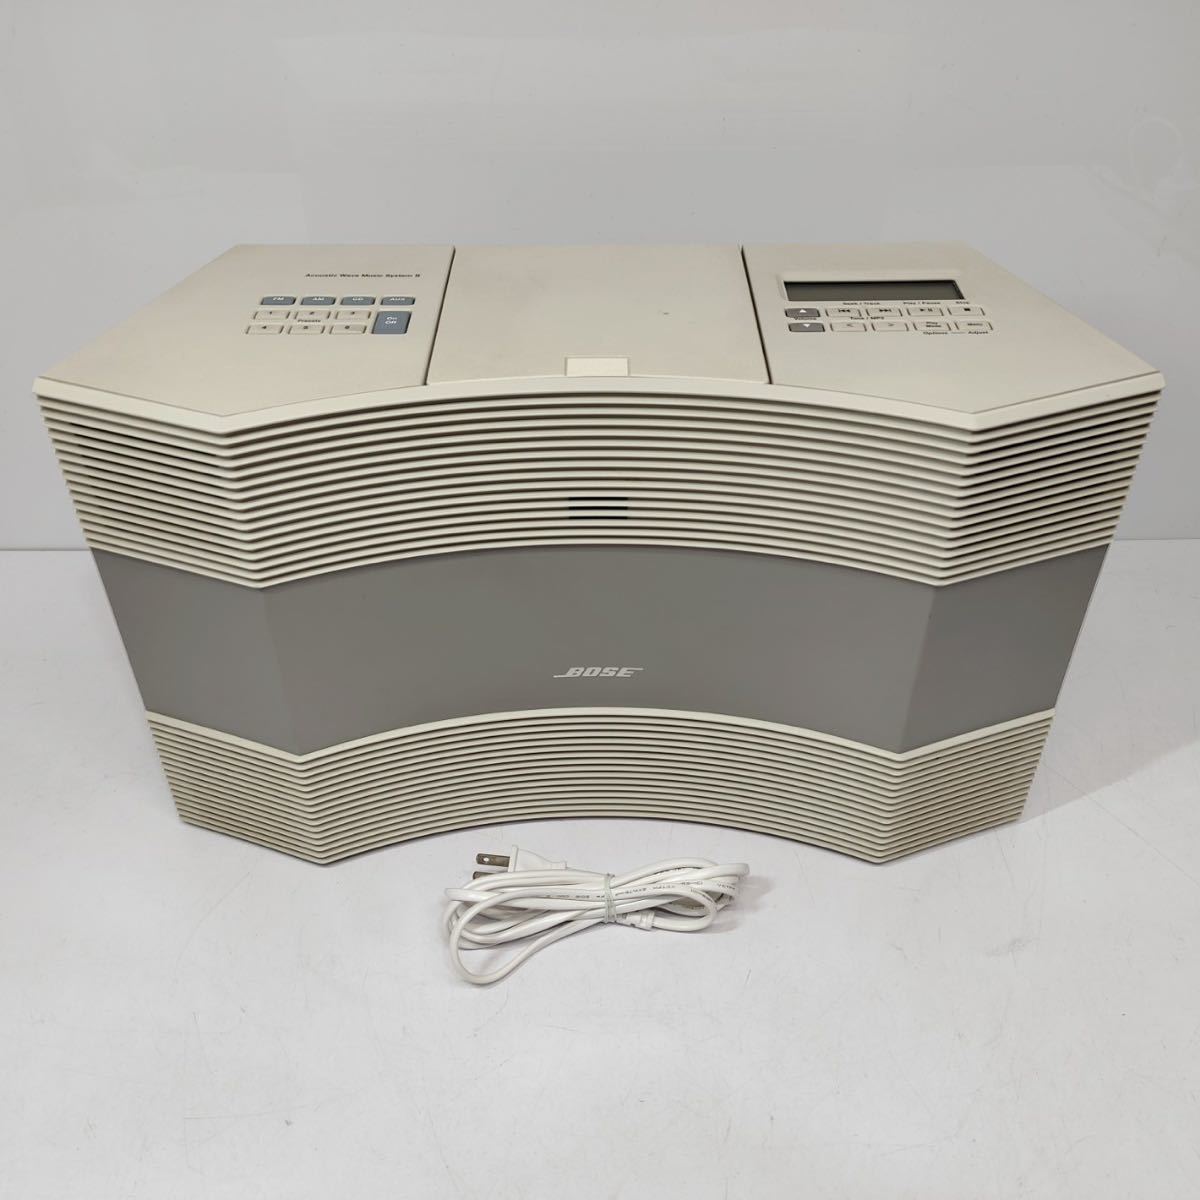 Bose Acoustic Wave music system II [グラファイトグレー ...